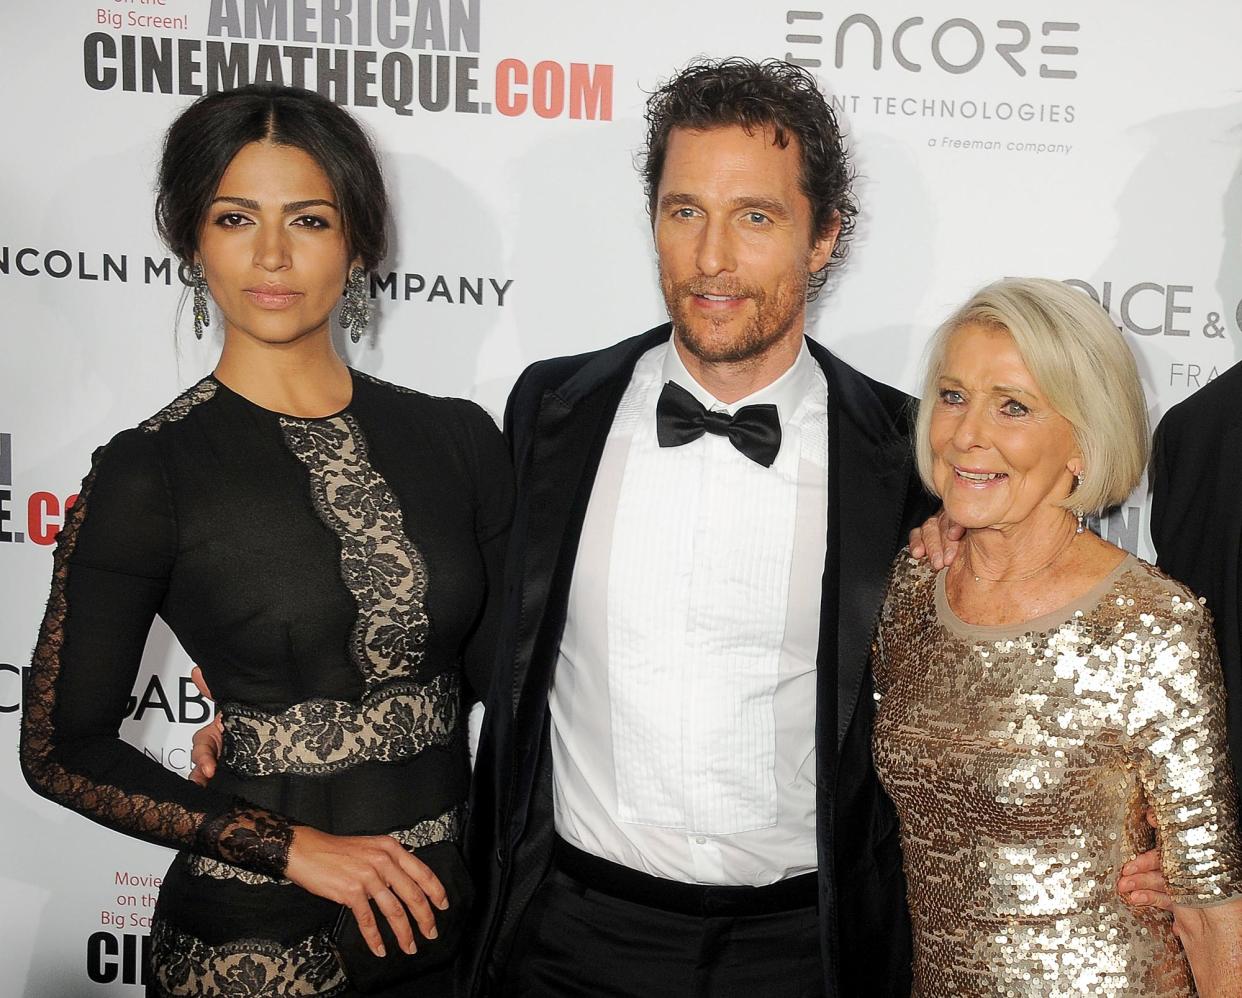 Matthew McConaughey Confirms His Mom Tested Wife Camila Alves We Are Big on Rites of Passage 312